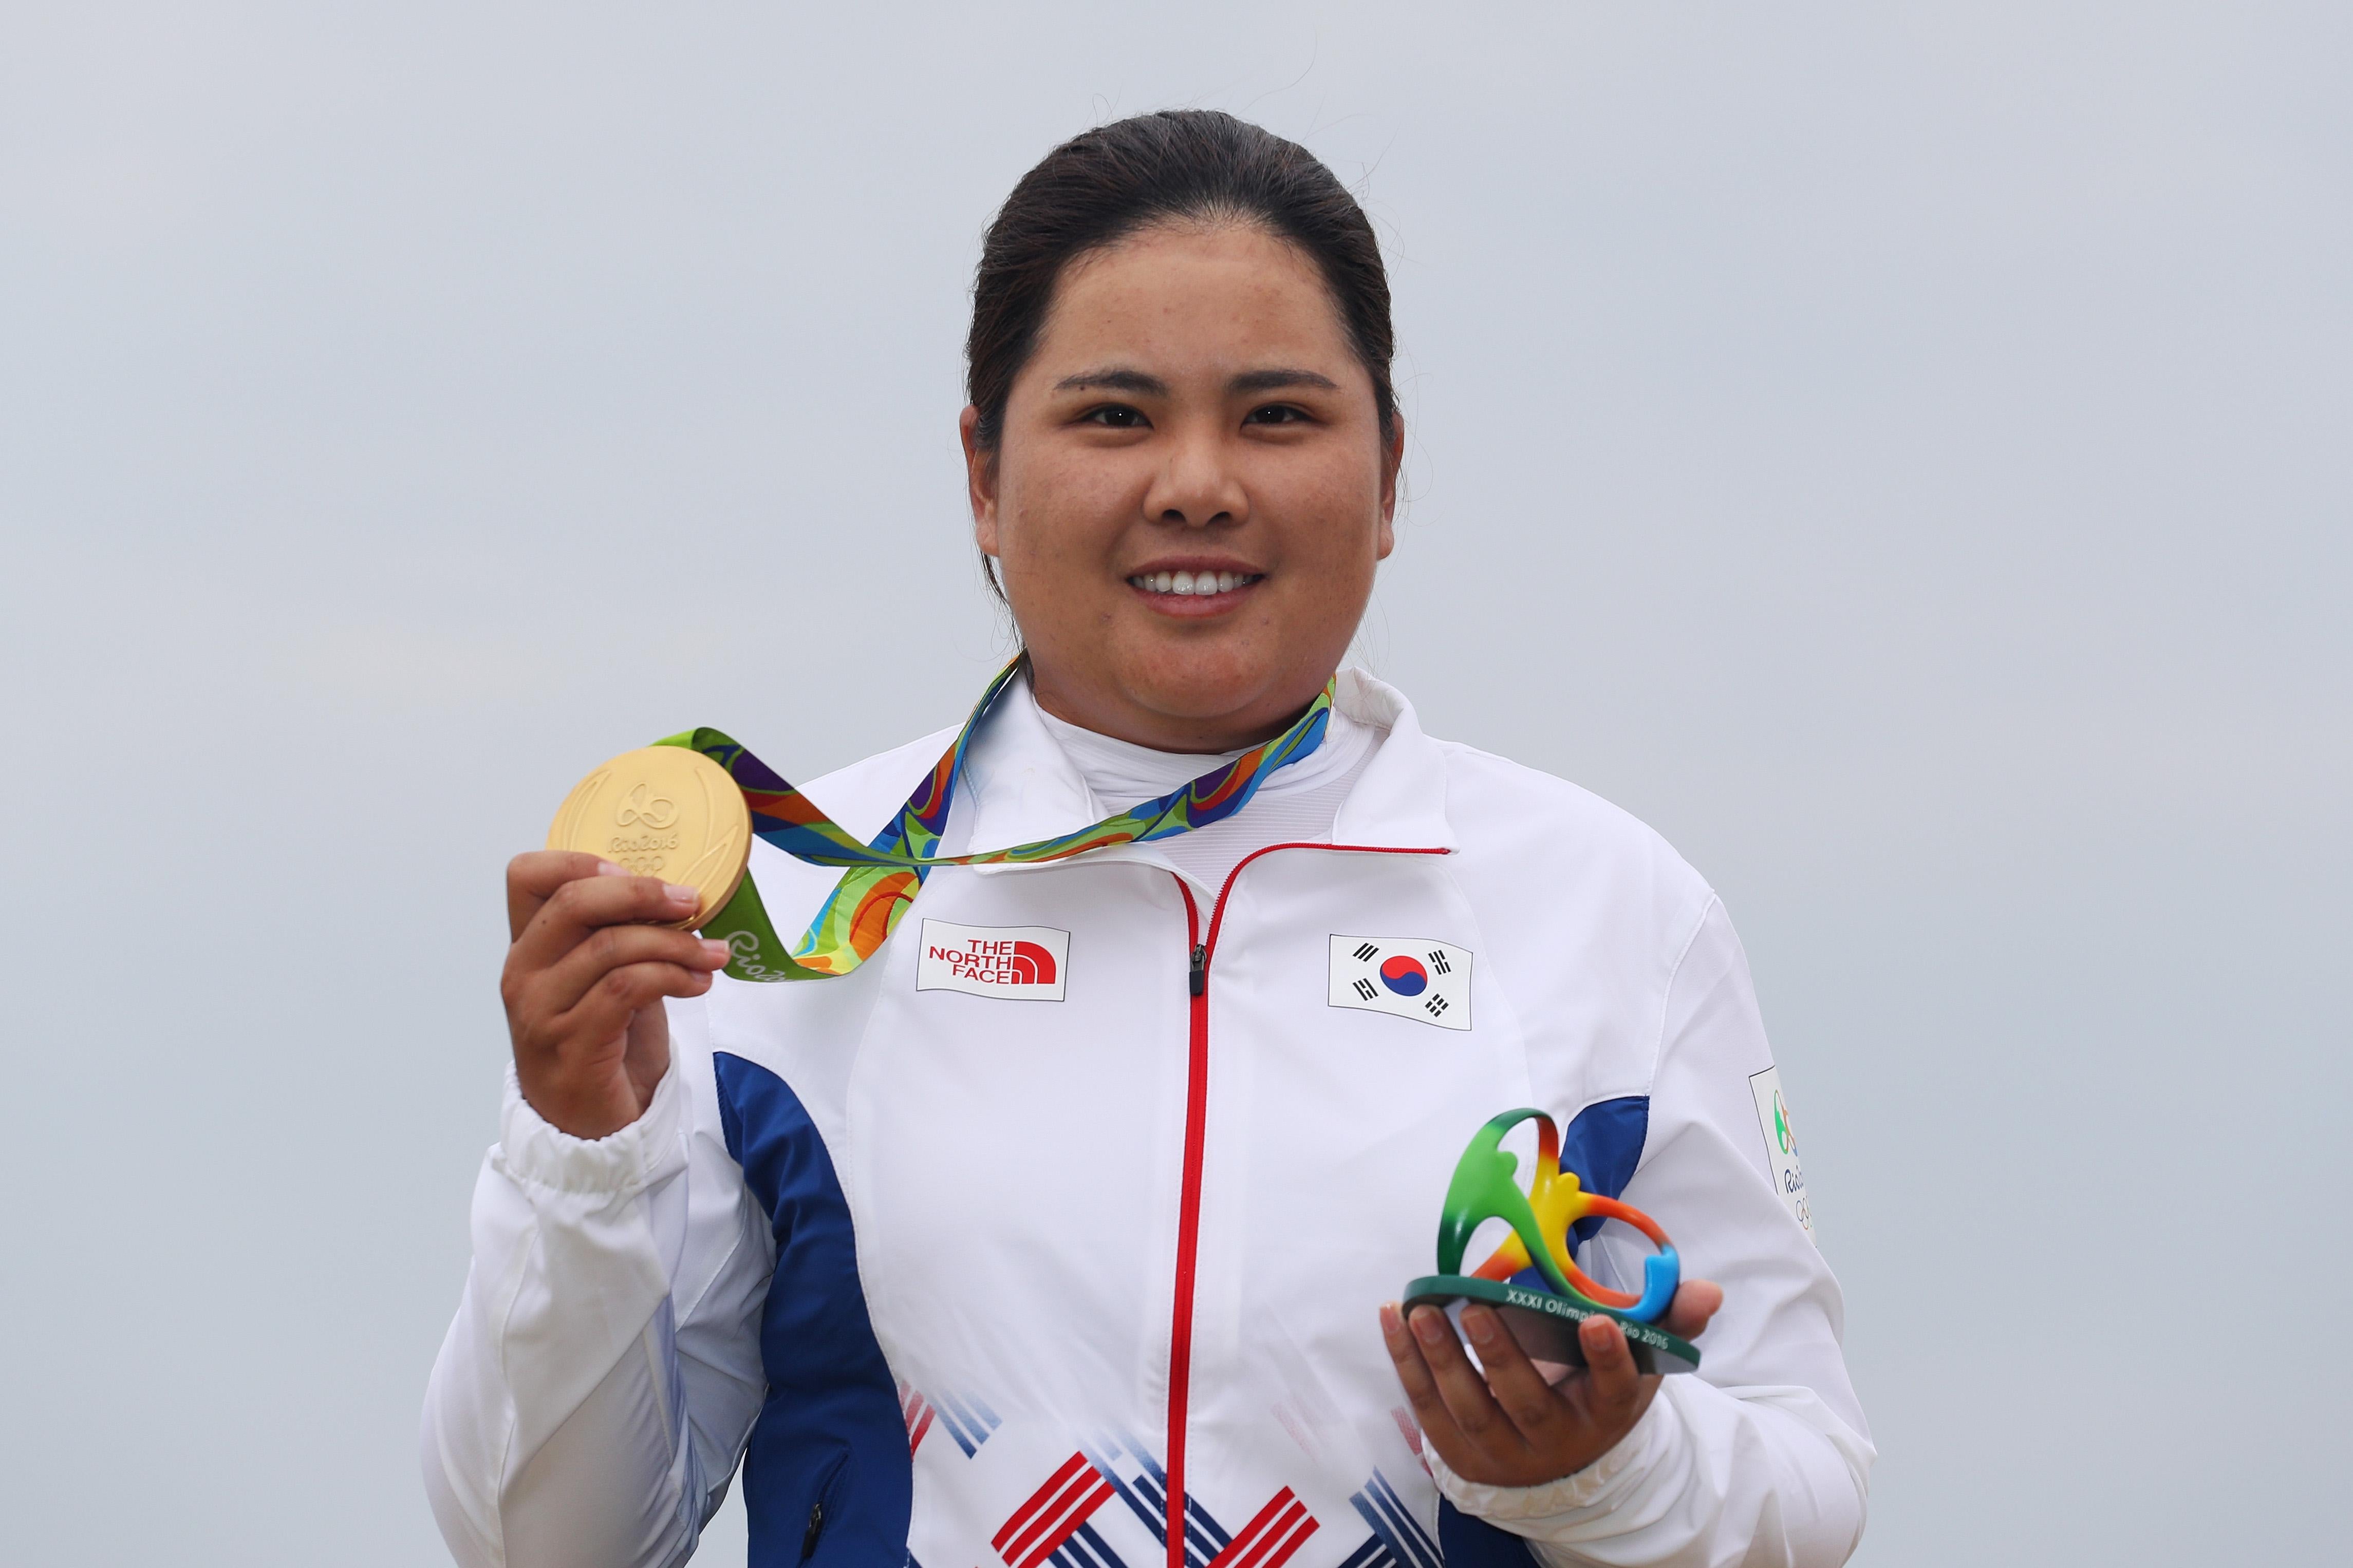 Gold medalist Inbee Park poses with her medal and the Rio Olympics logo statue.